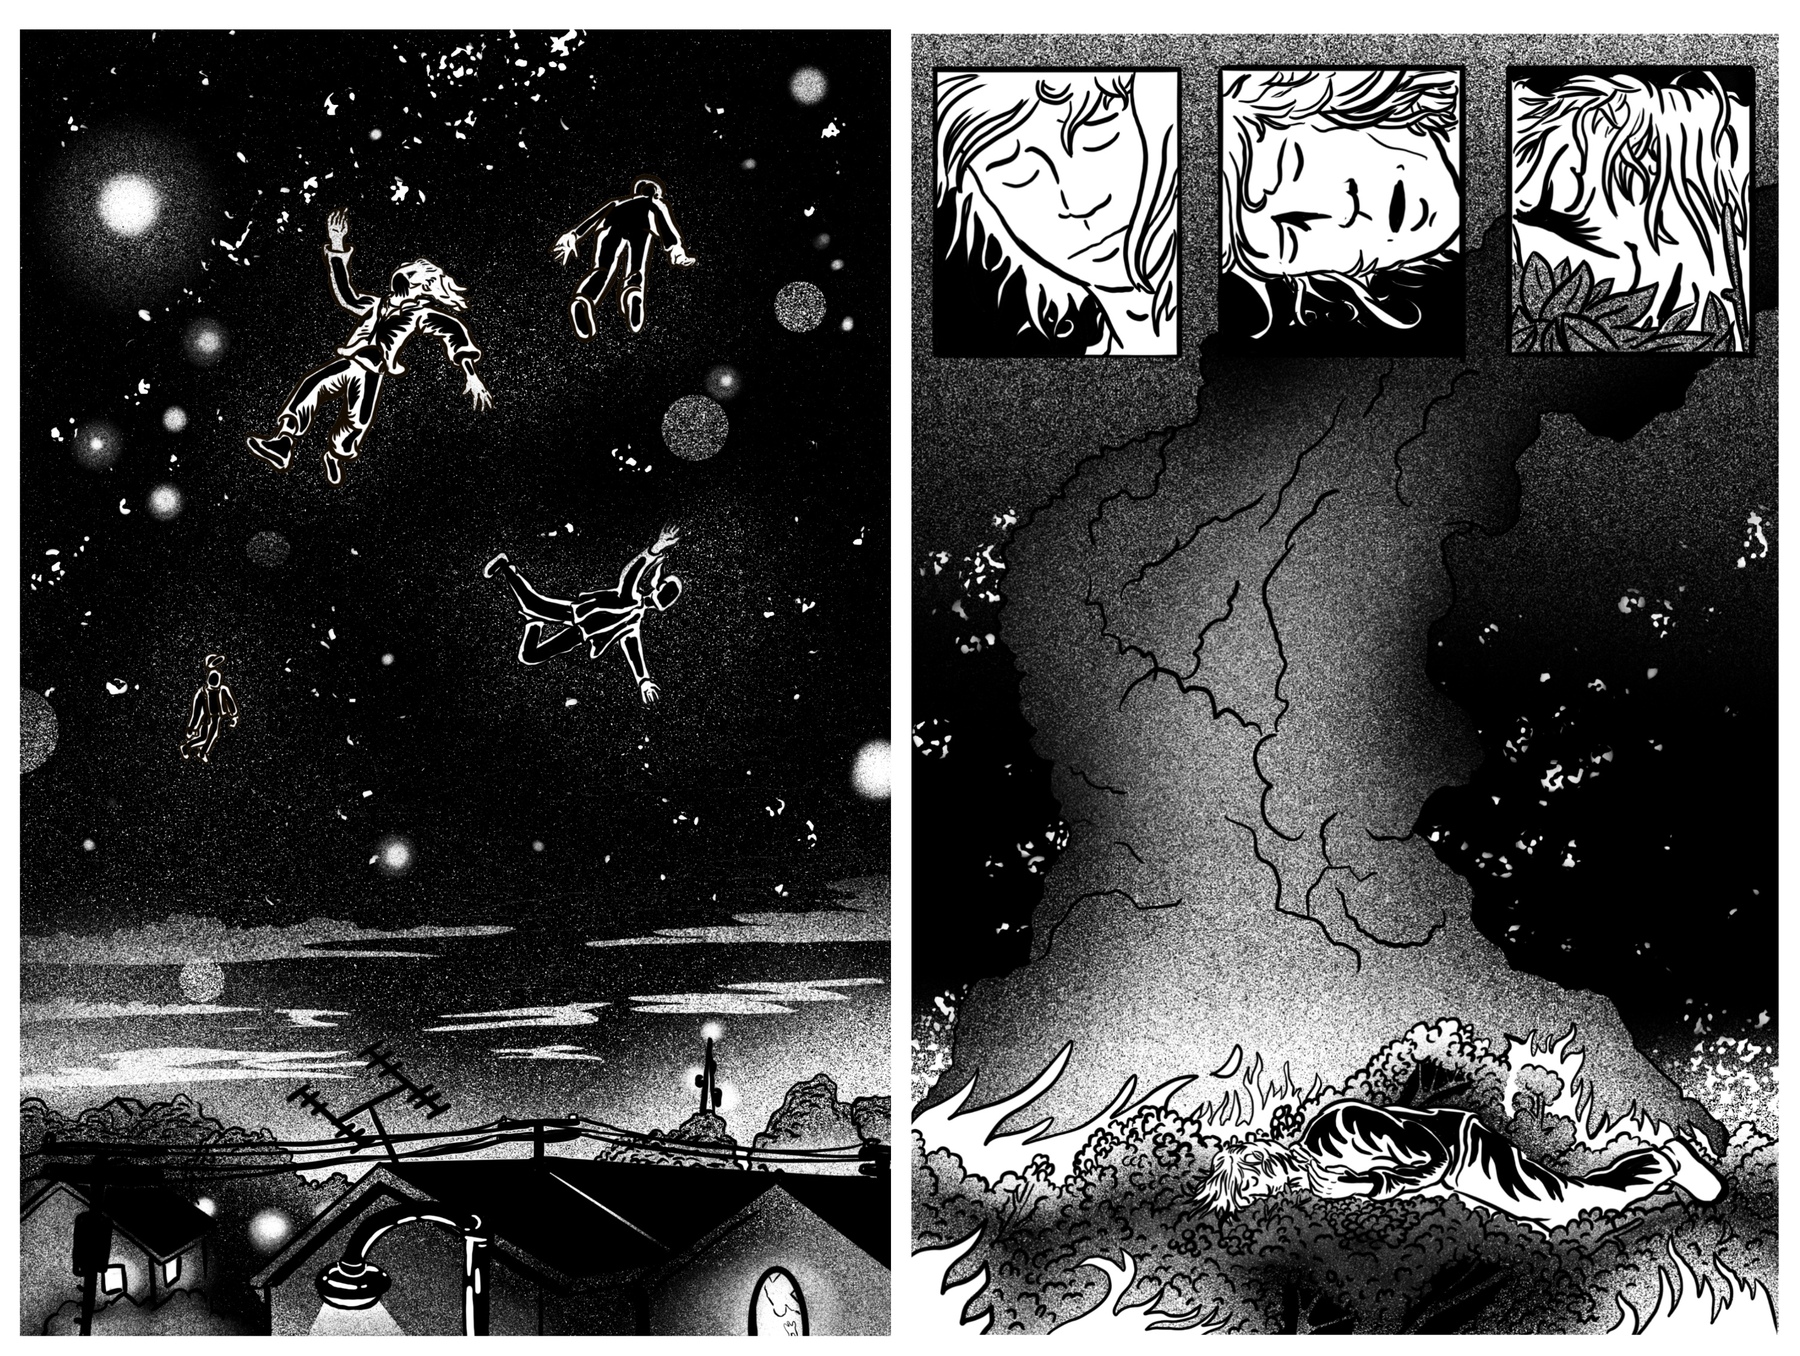 Two illustrated panels. One features figures falling through a night sky, and another features a column rising out of a sea of flames.